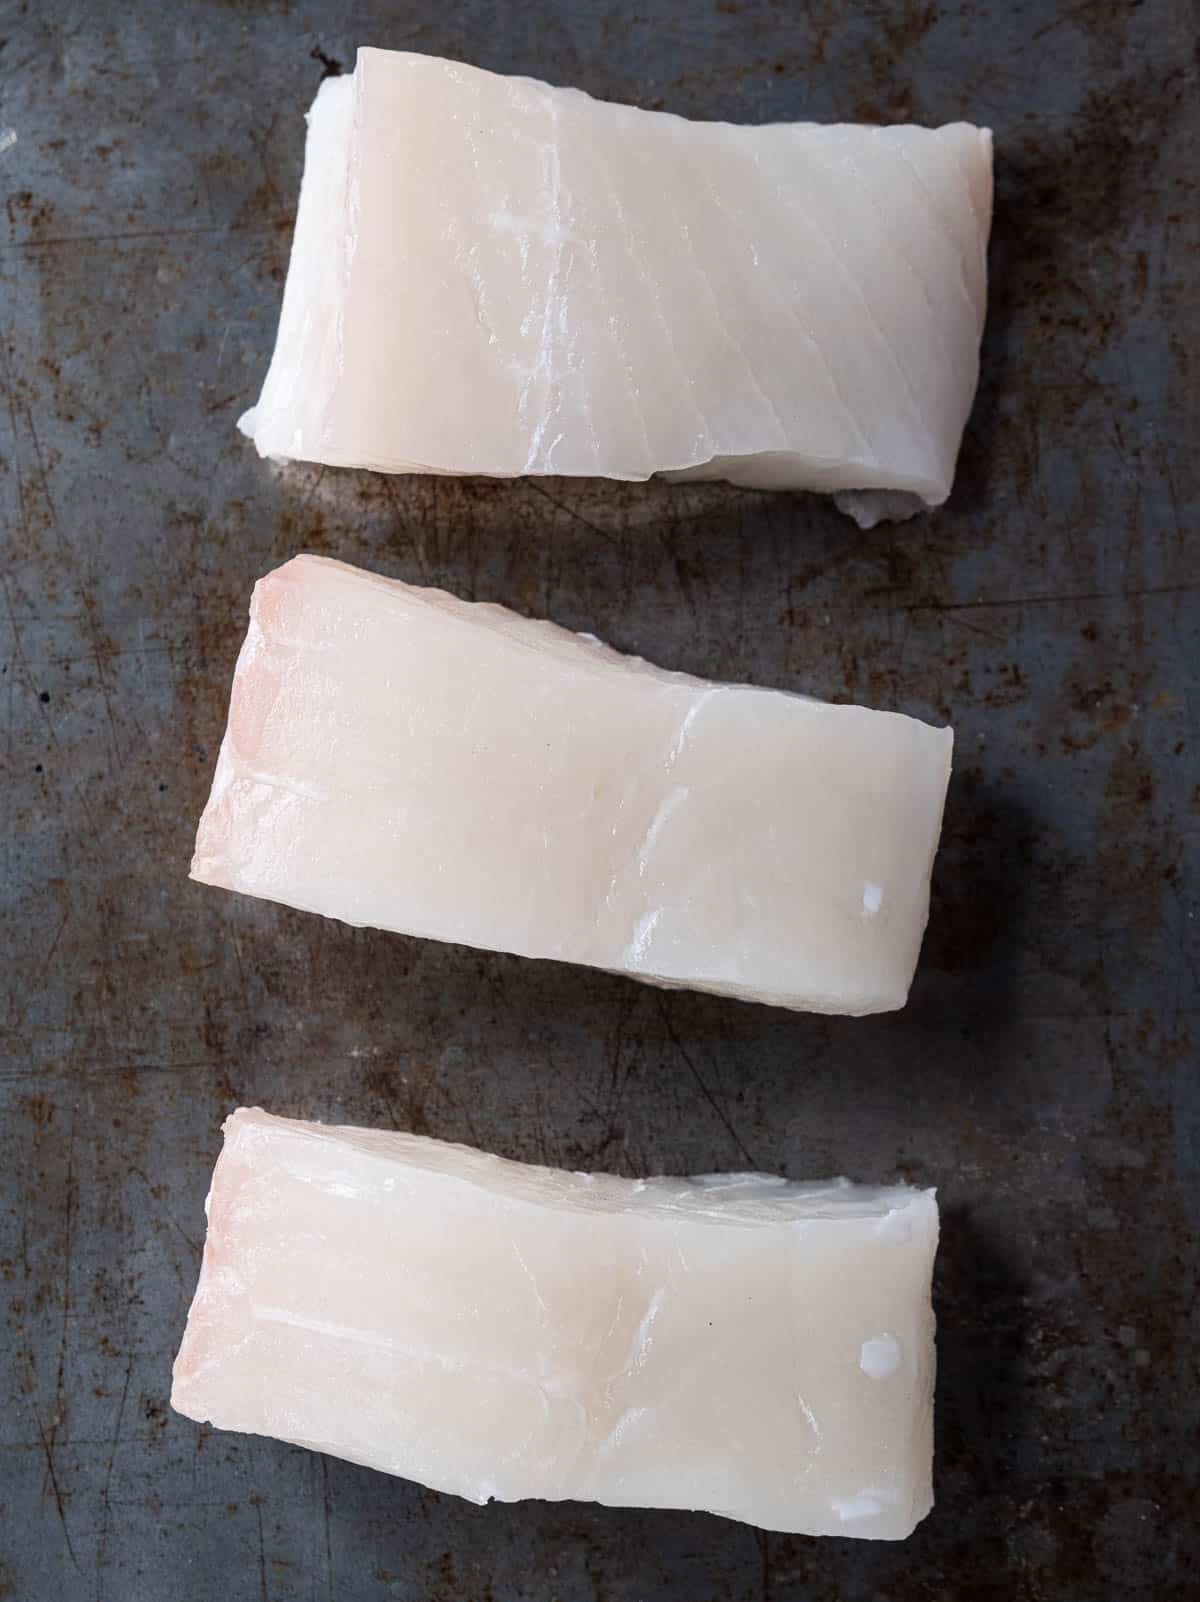 3 Raw halibut steaks on a sheet pan.